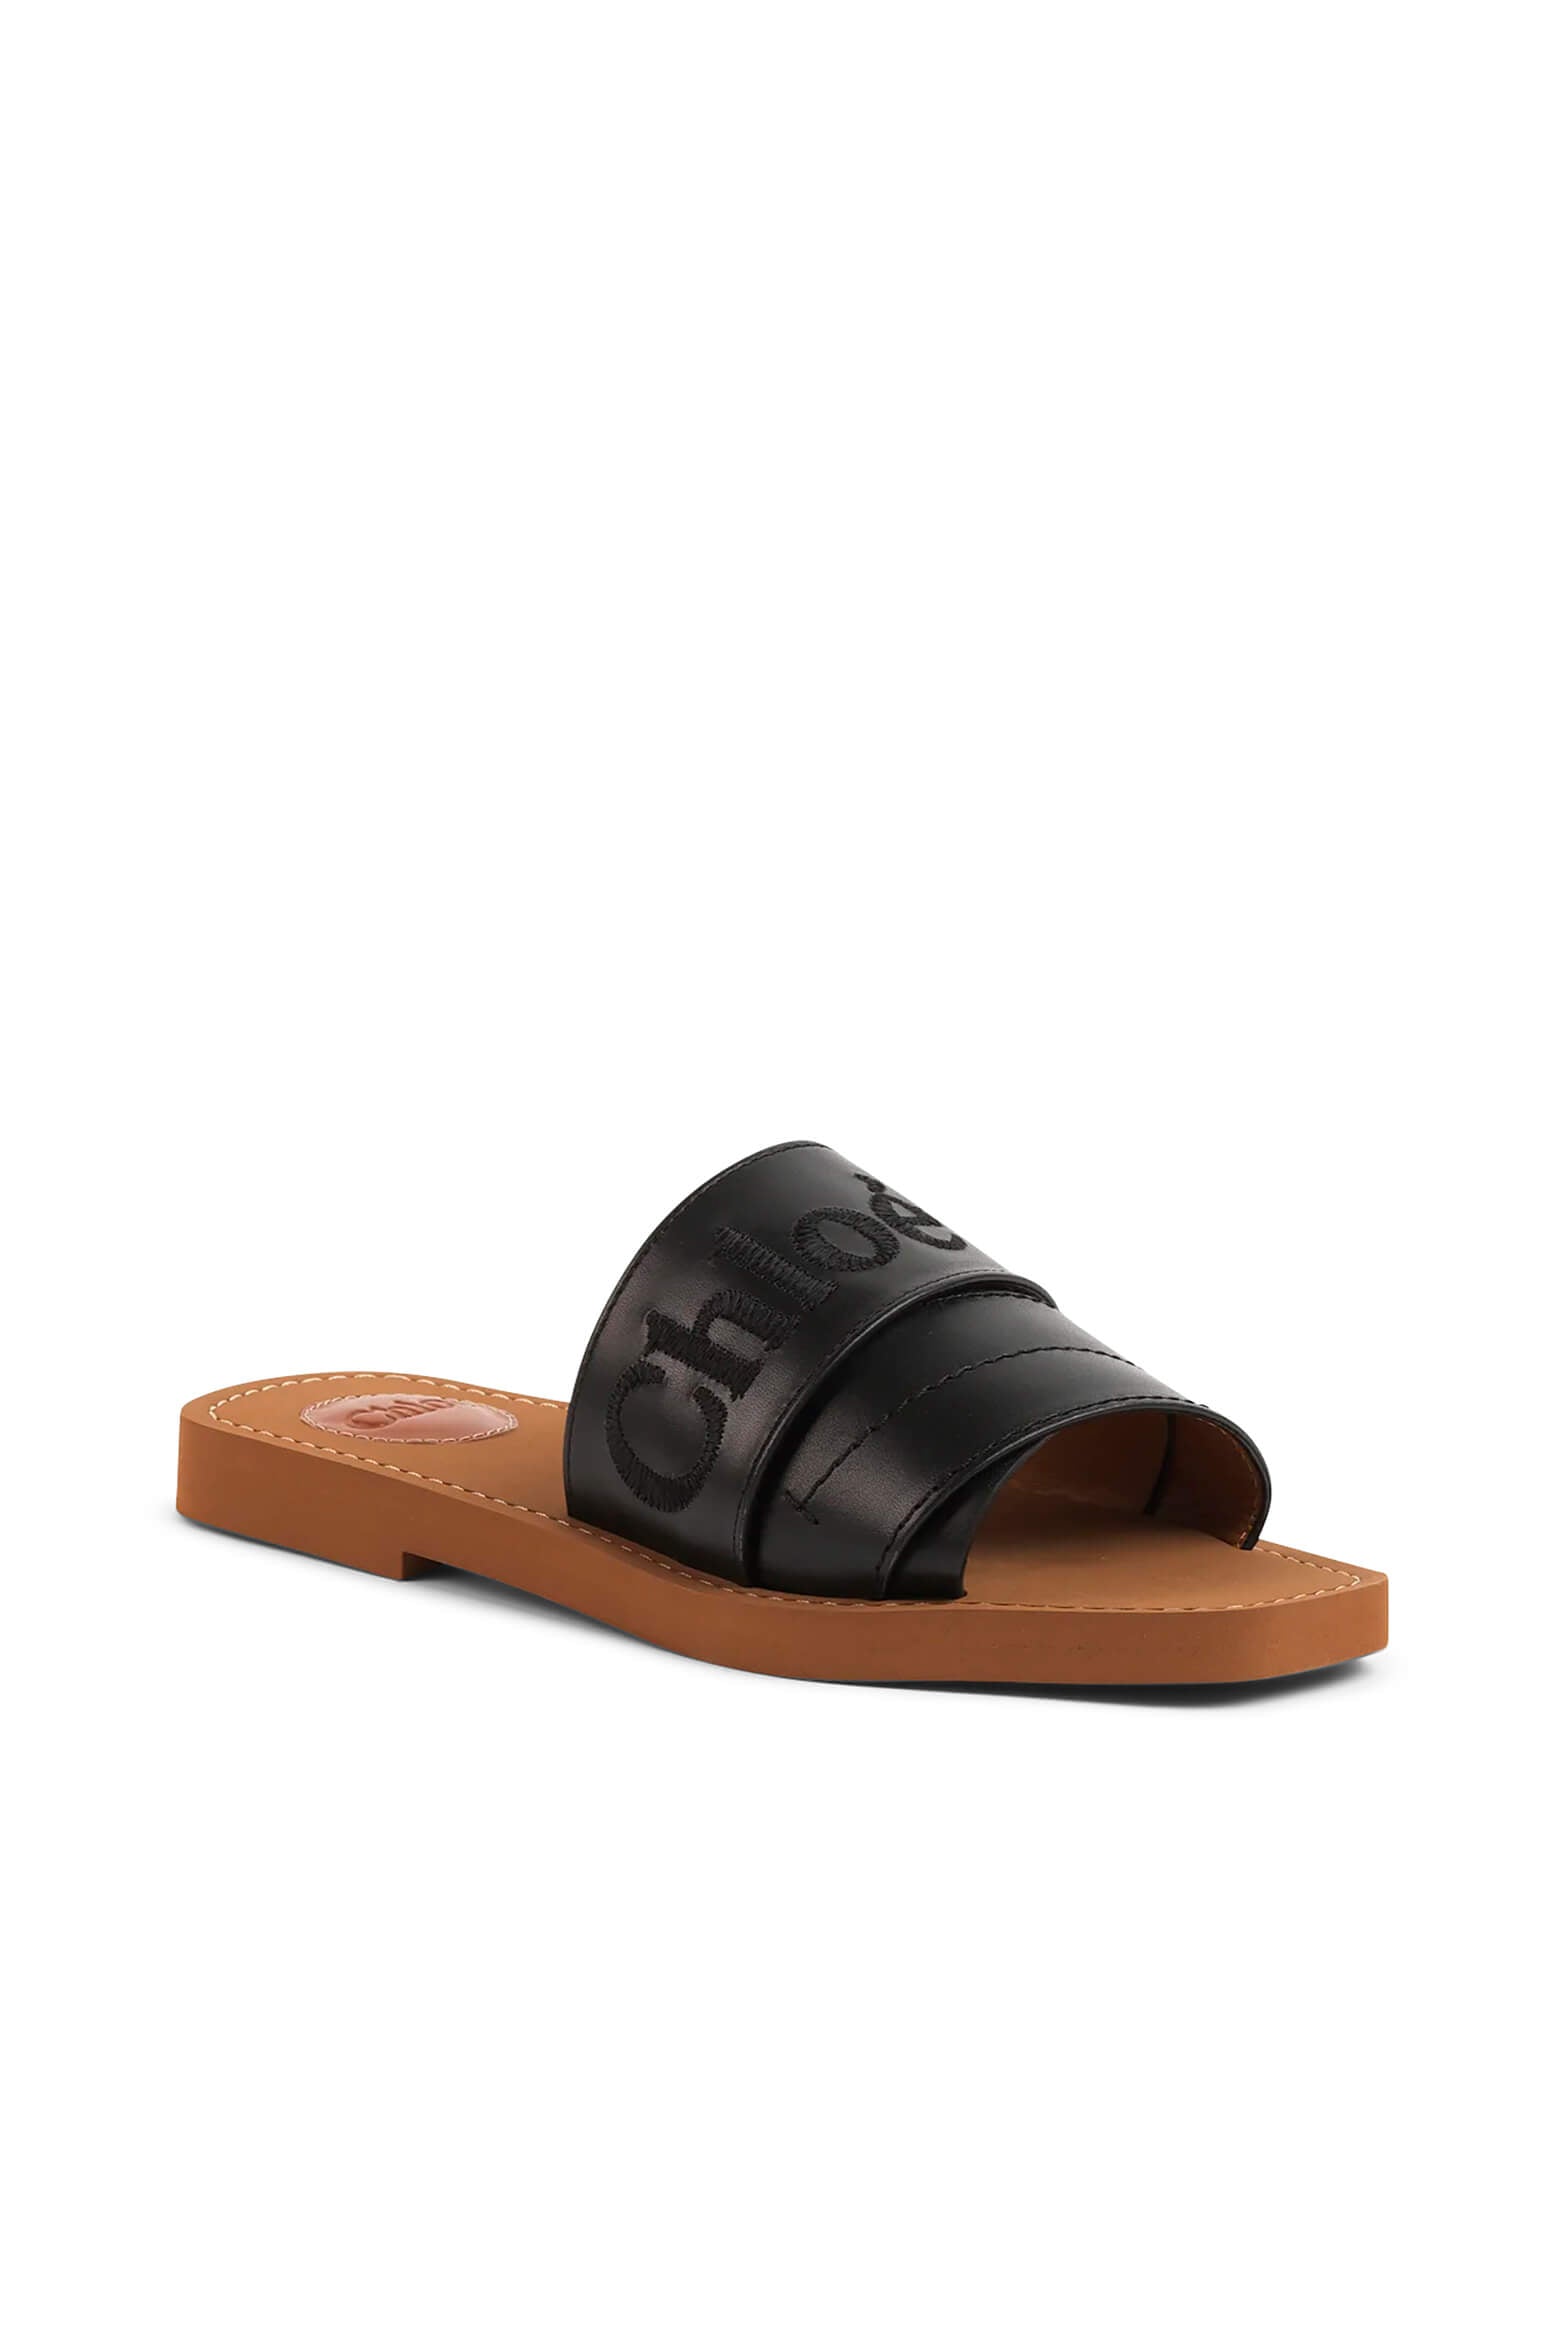 Chloe Woody Leather Slide in Black from The New Trend